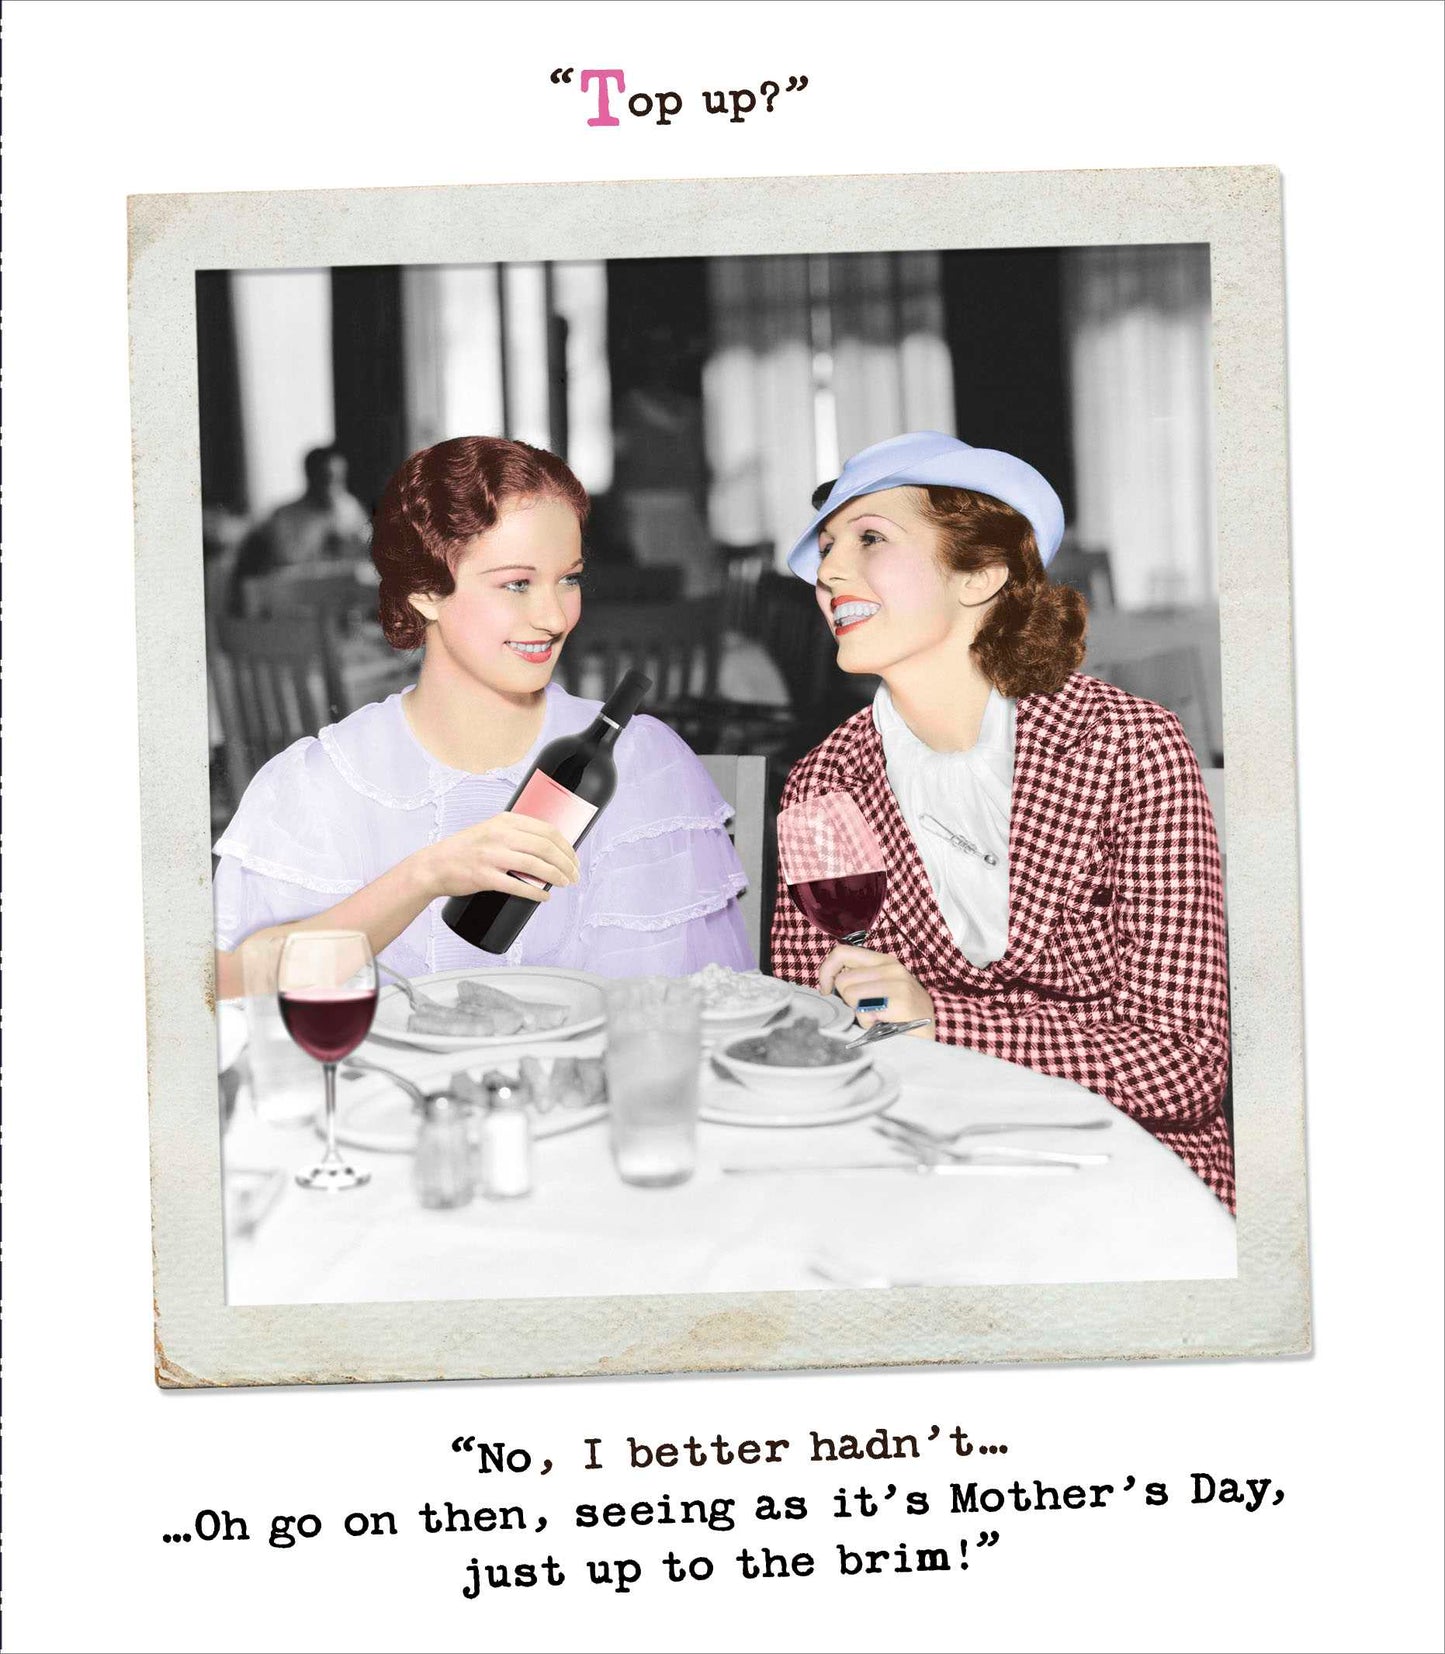 Funny Top Up? Just Up To The Brim Mother's Day Card